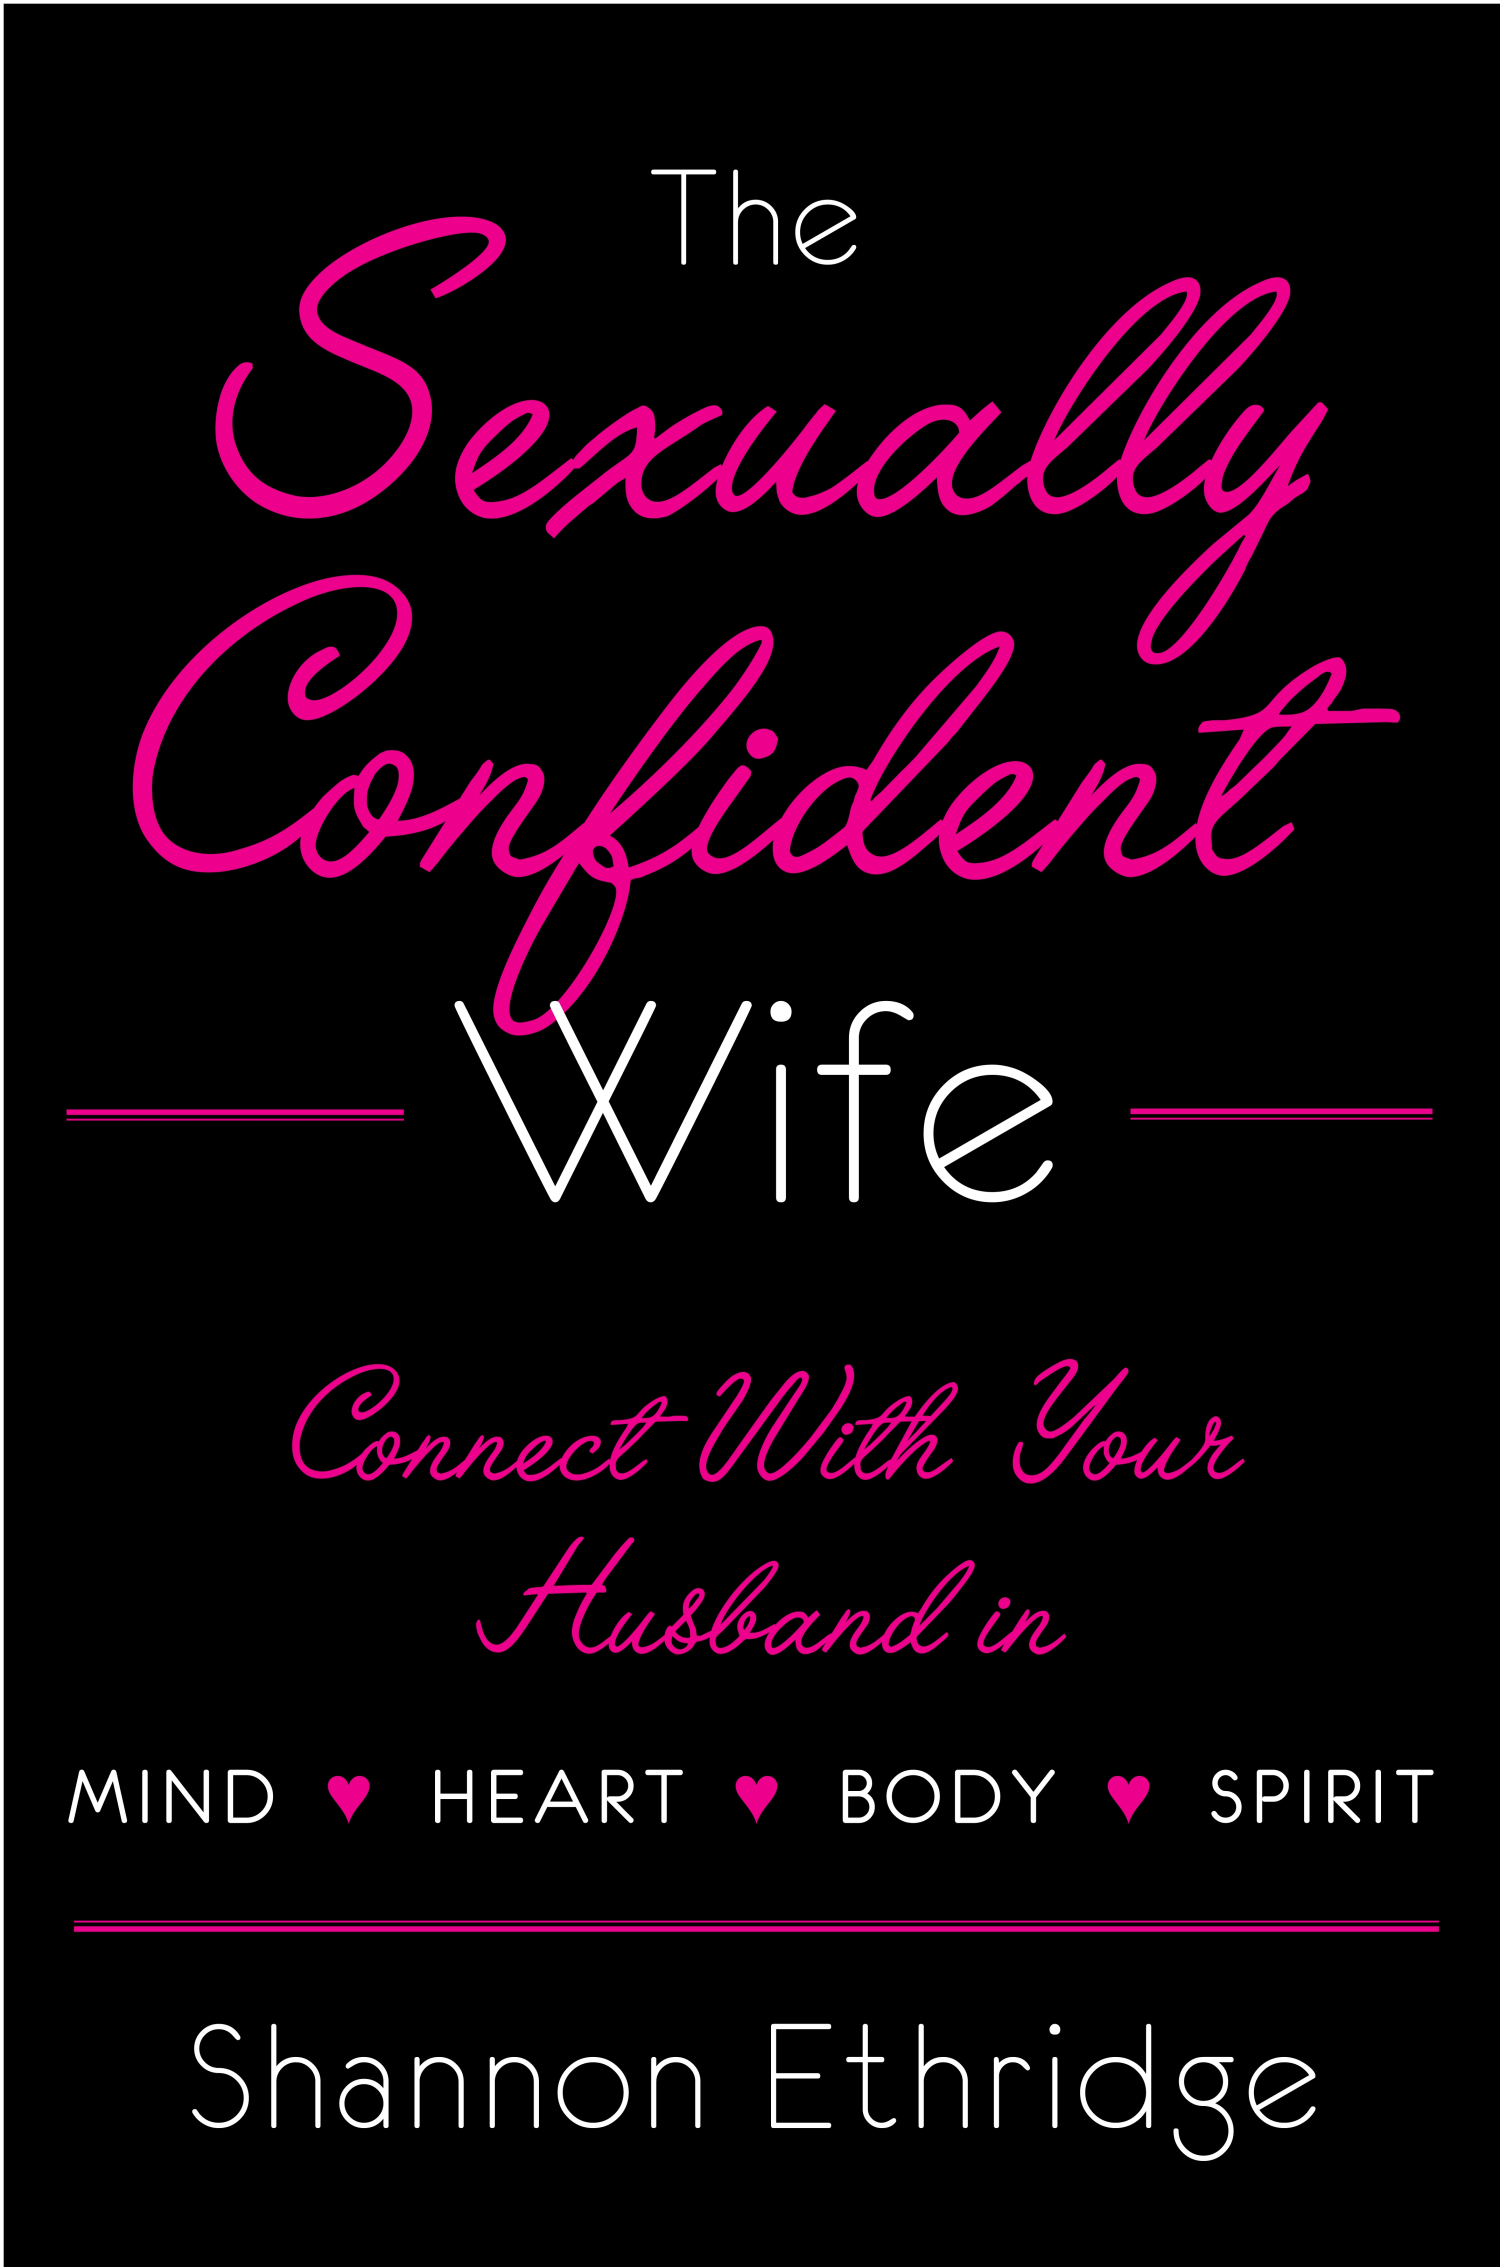 How to restore your sexual confidence image